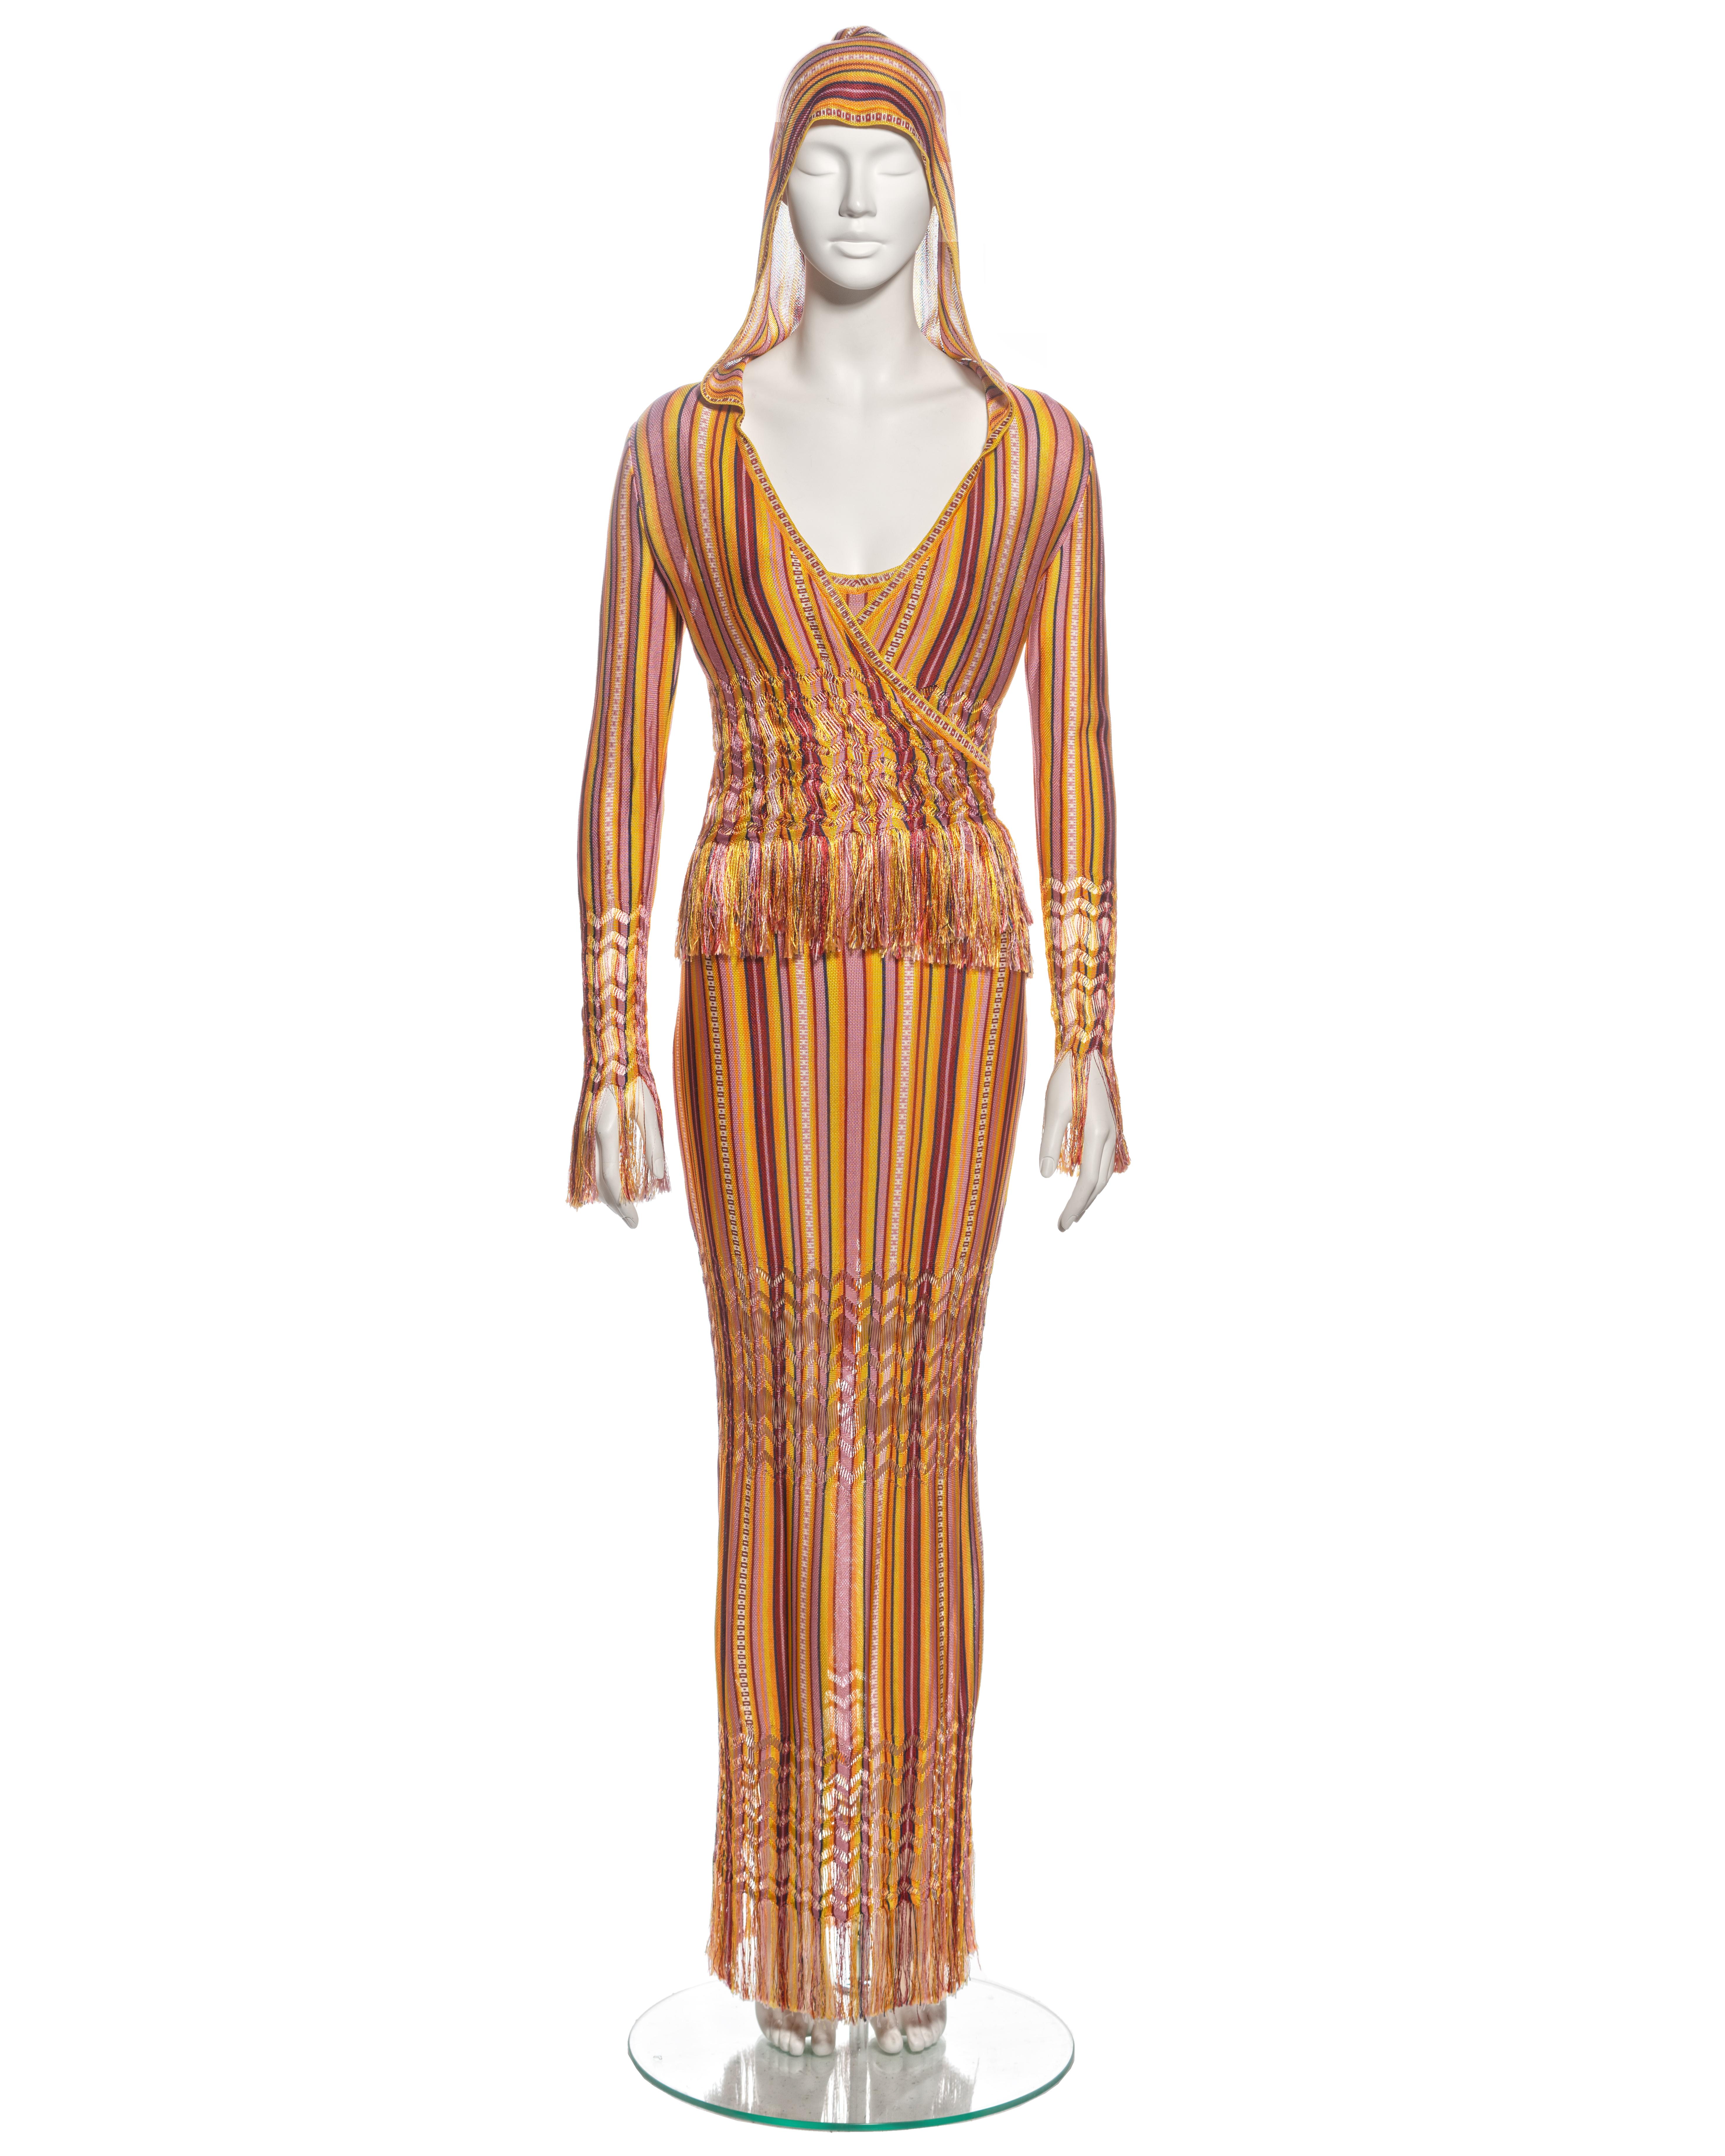 ▪ Archival Christian Dior Dress and Cardigan Set
▪ Creative Director: John Galliano
▪ Spring-Summer 2002
▪ Sold by One of a Kind Archive
▪ Made from viscose knit-jersey, featuring a striped motif in shades of pink, orange, yellow, burgundy, and